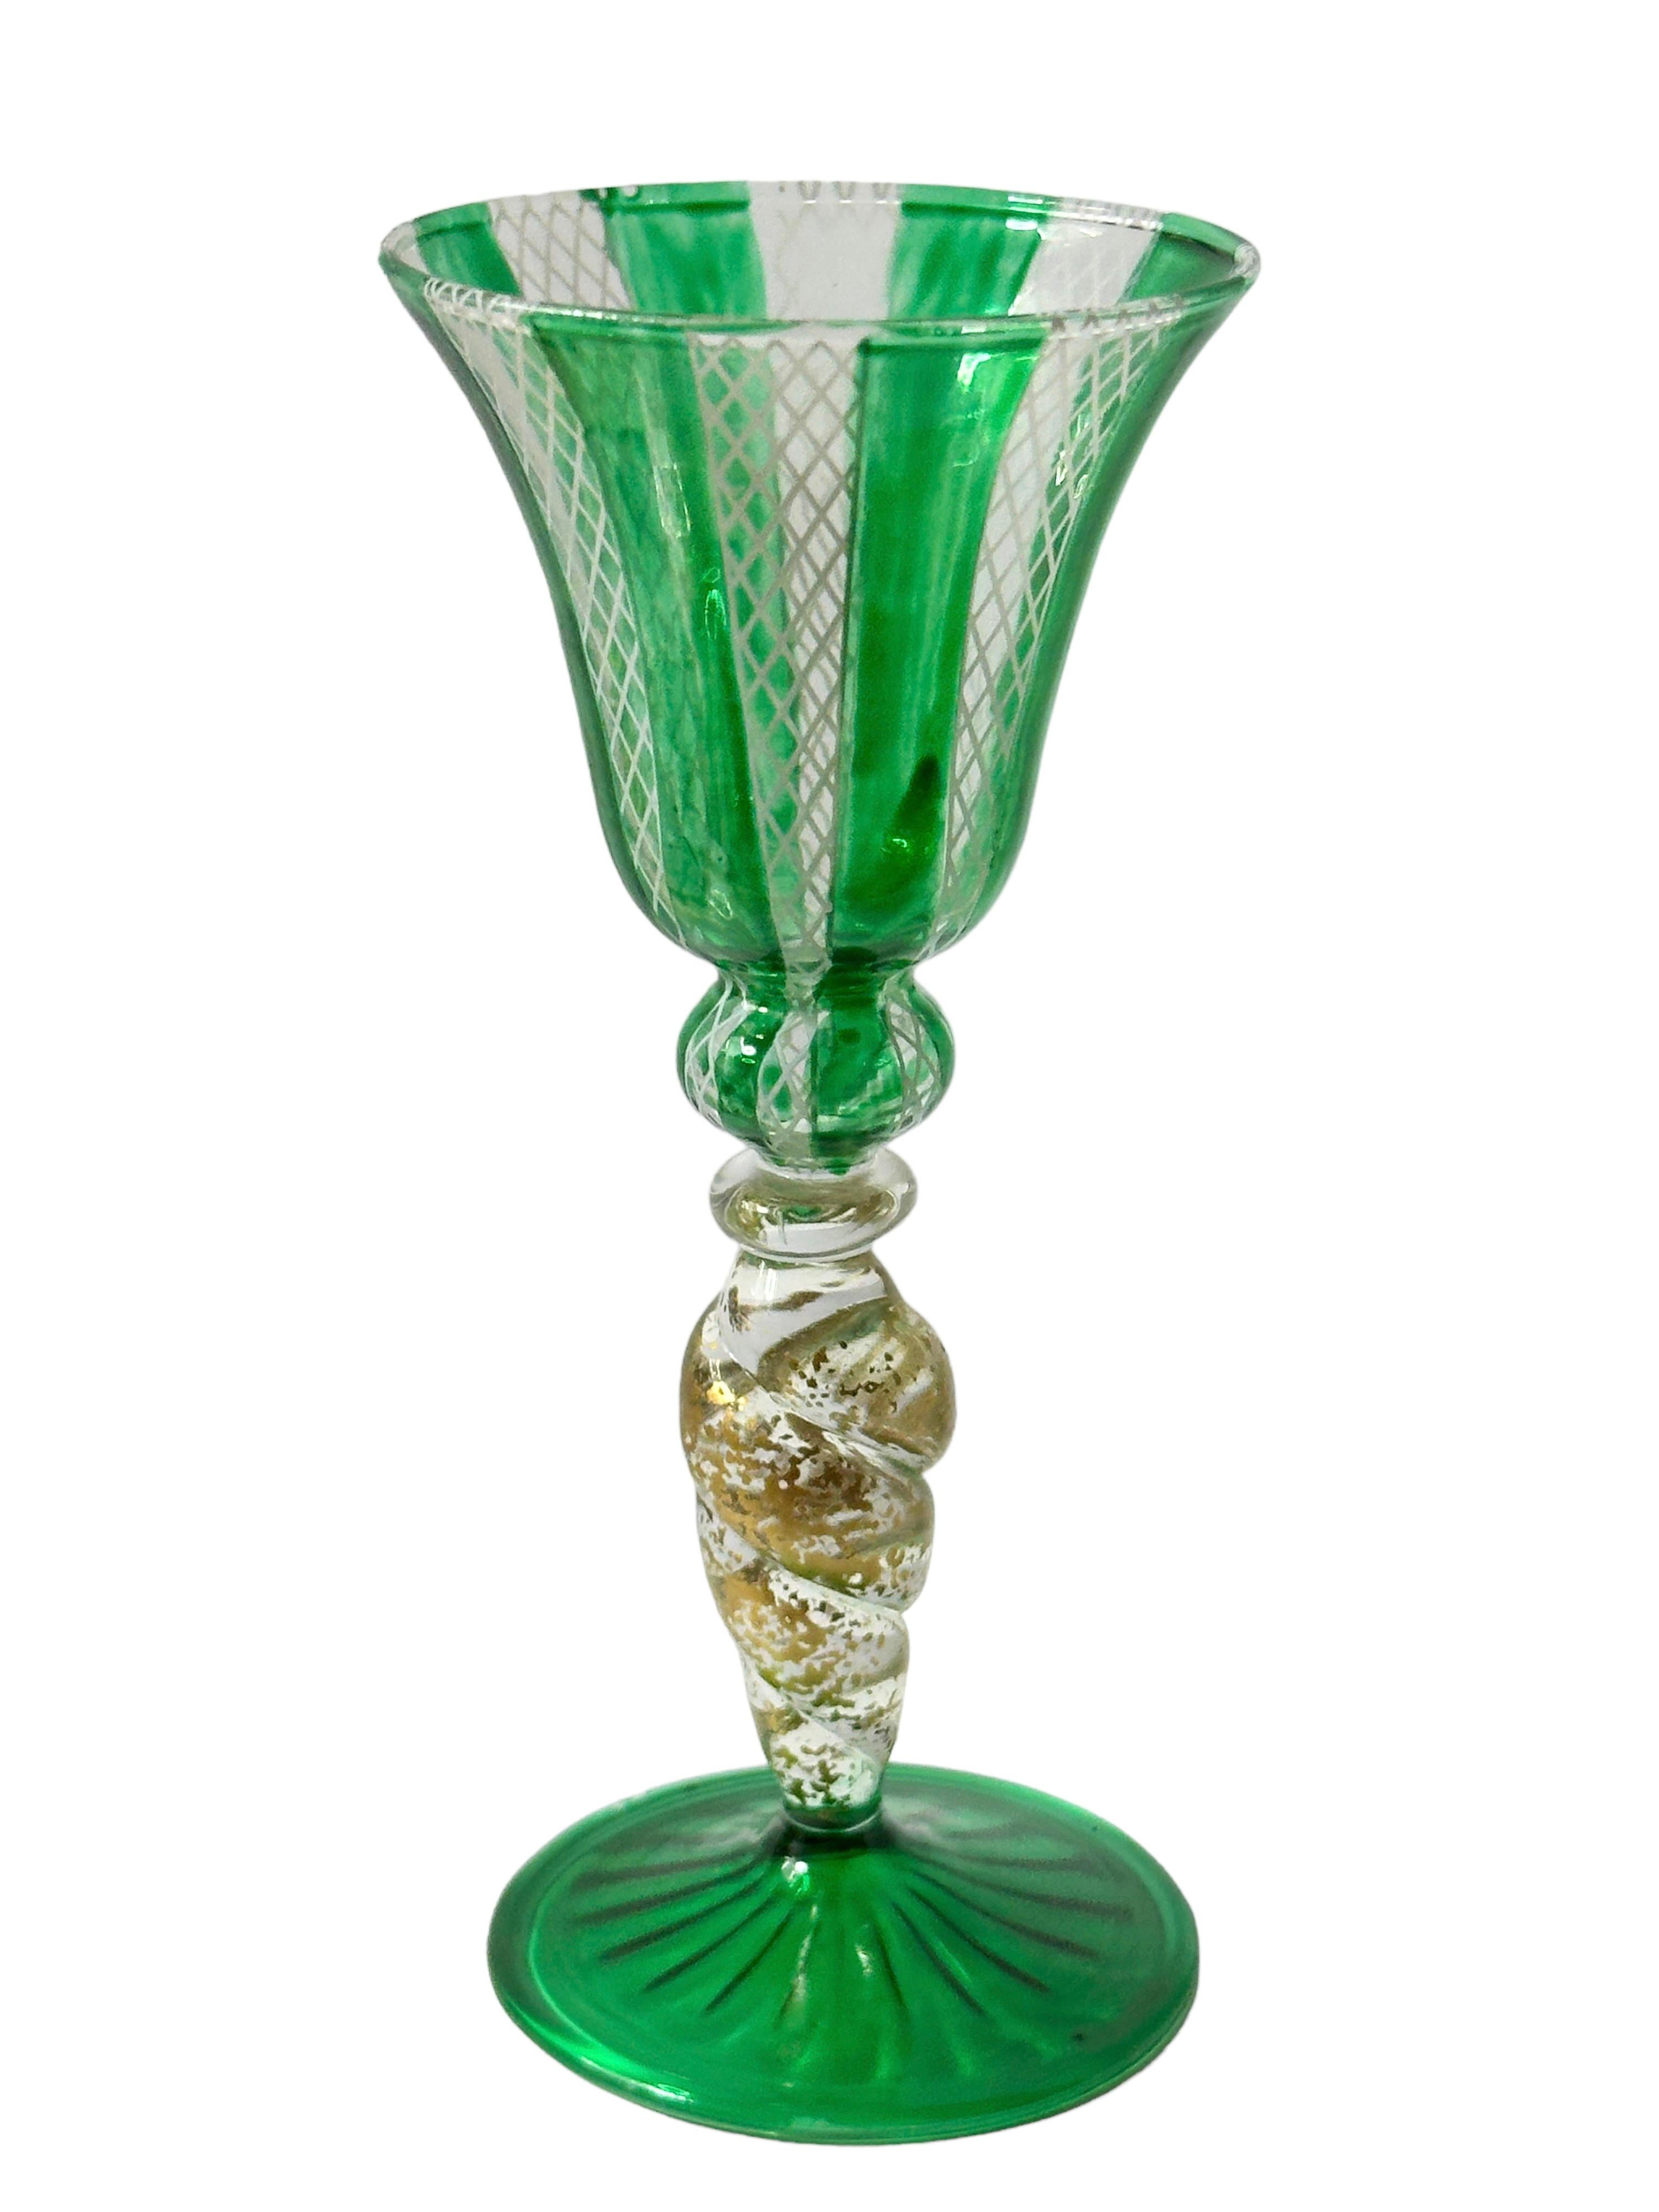 Italian Green & Gold Stardust Salviati Murano Glass Liqueur Goblet, Vintage Italy  For Sale